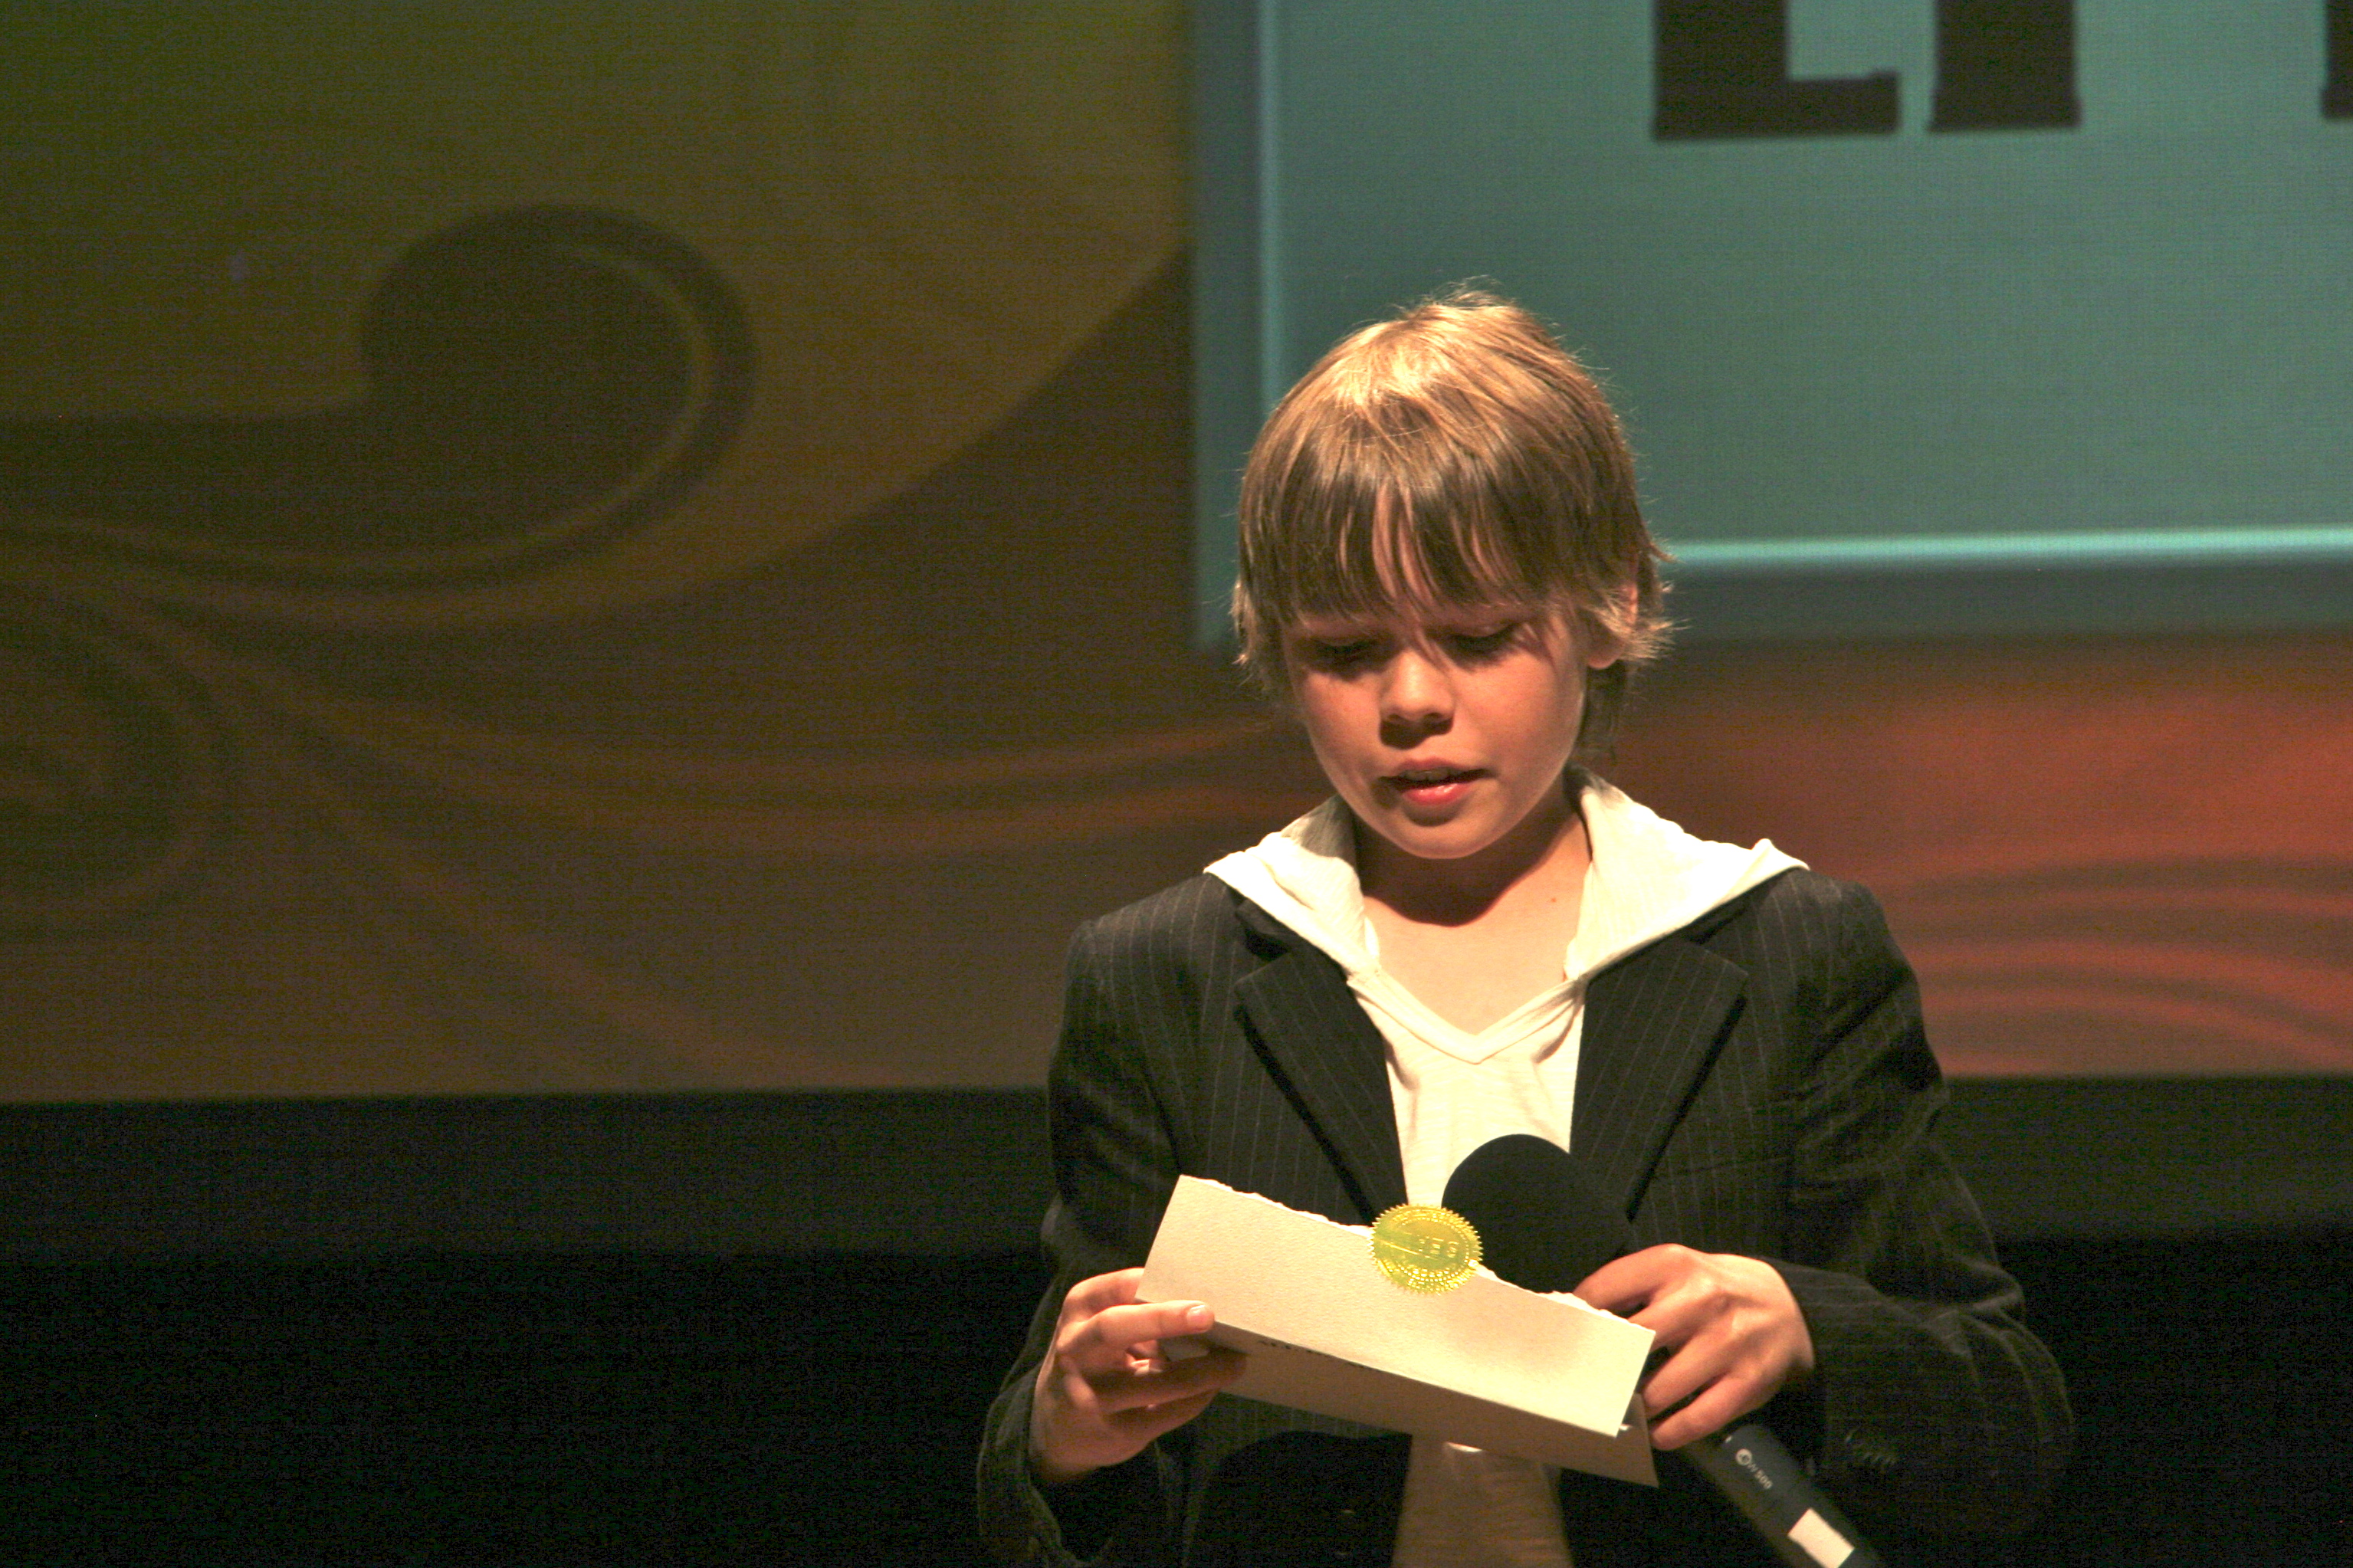 Gage presenting an award at the Youth Media Alliance Awards - June 2011